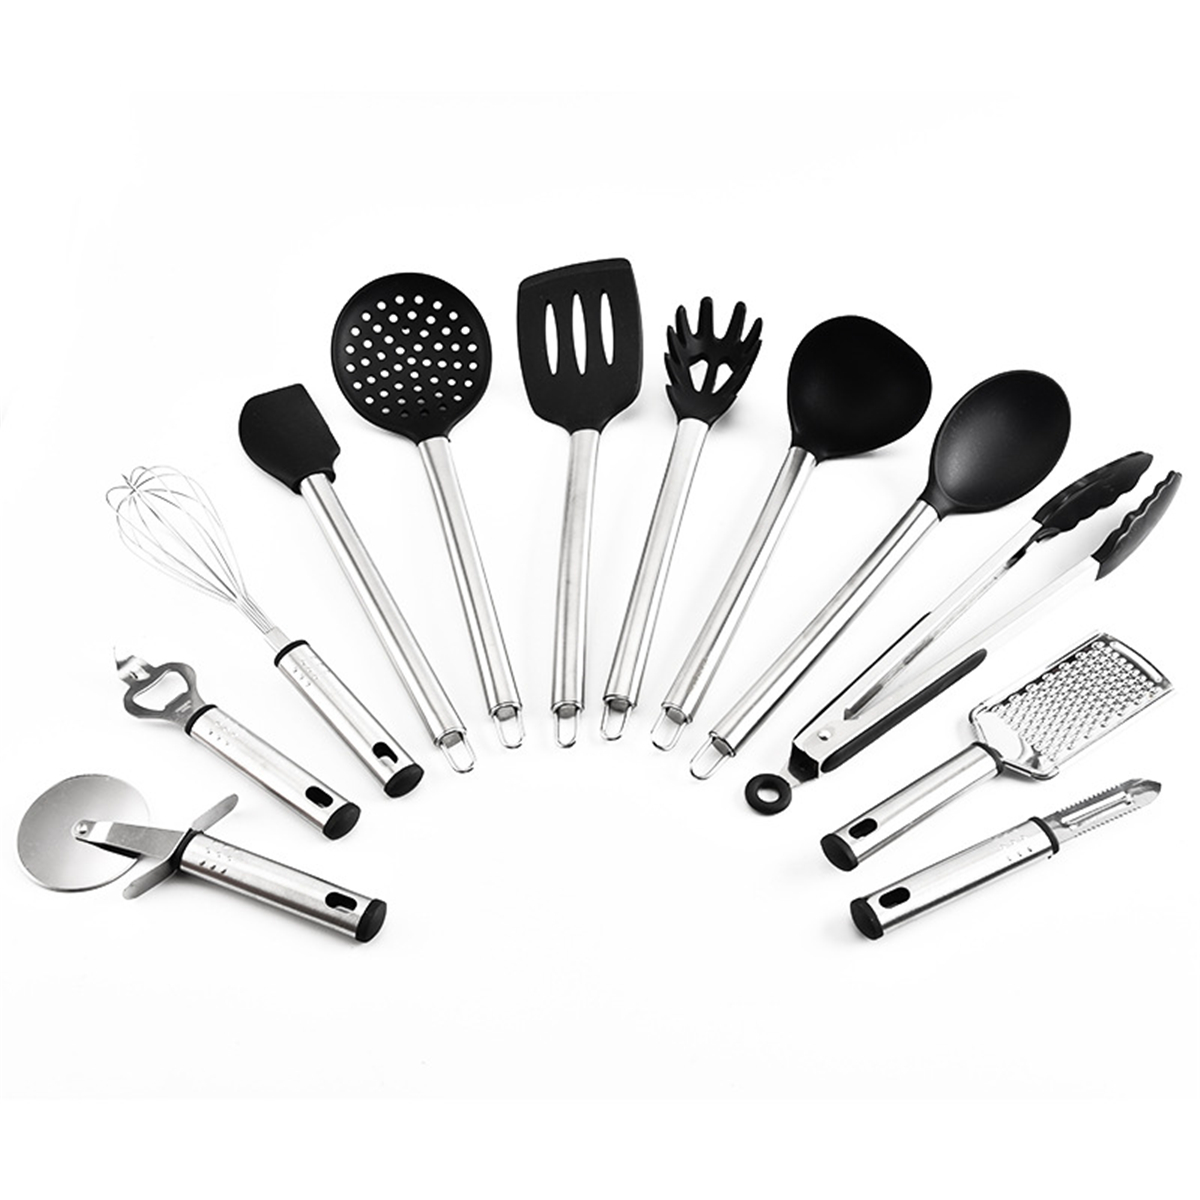 23pcs-Steel-Handle-Silicone-Non-Stick-Pan-Spoon-Utensils-Kitchenware-Cookware-1686237-3